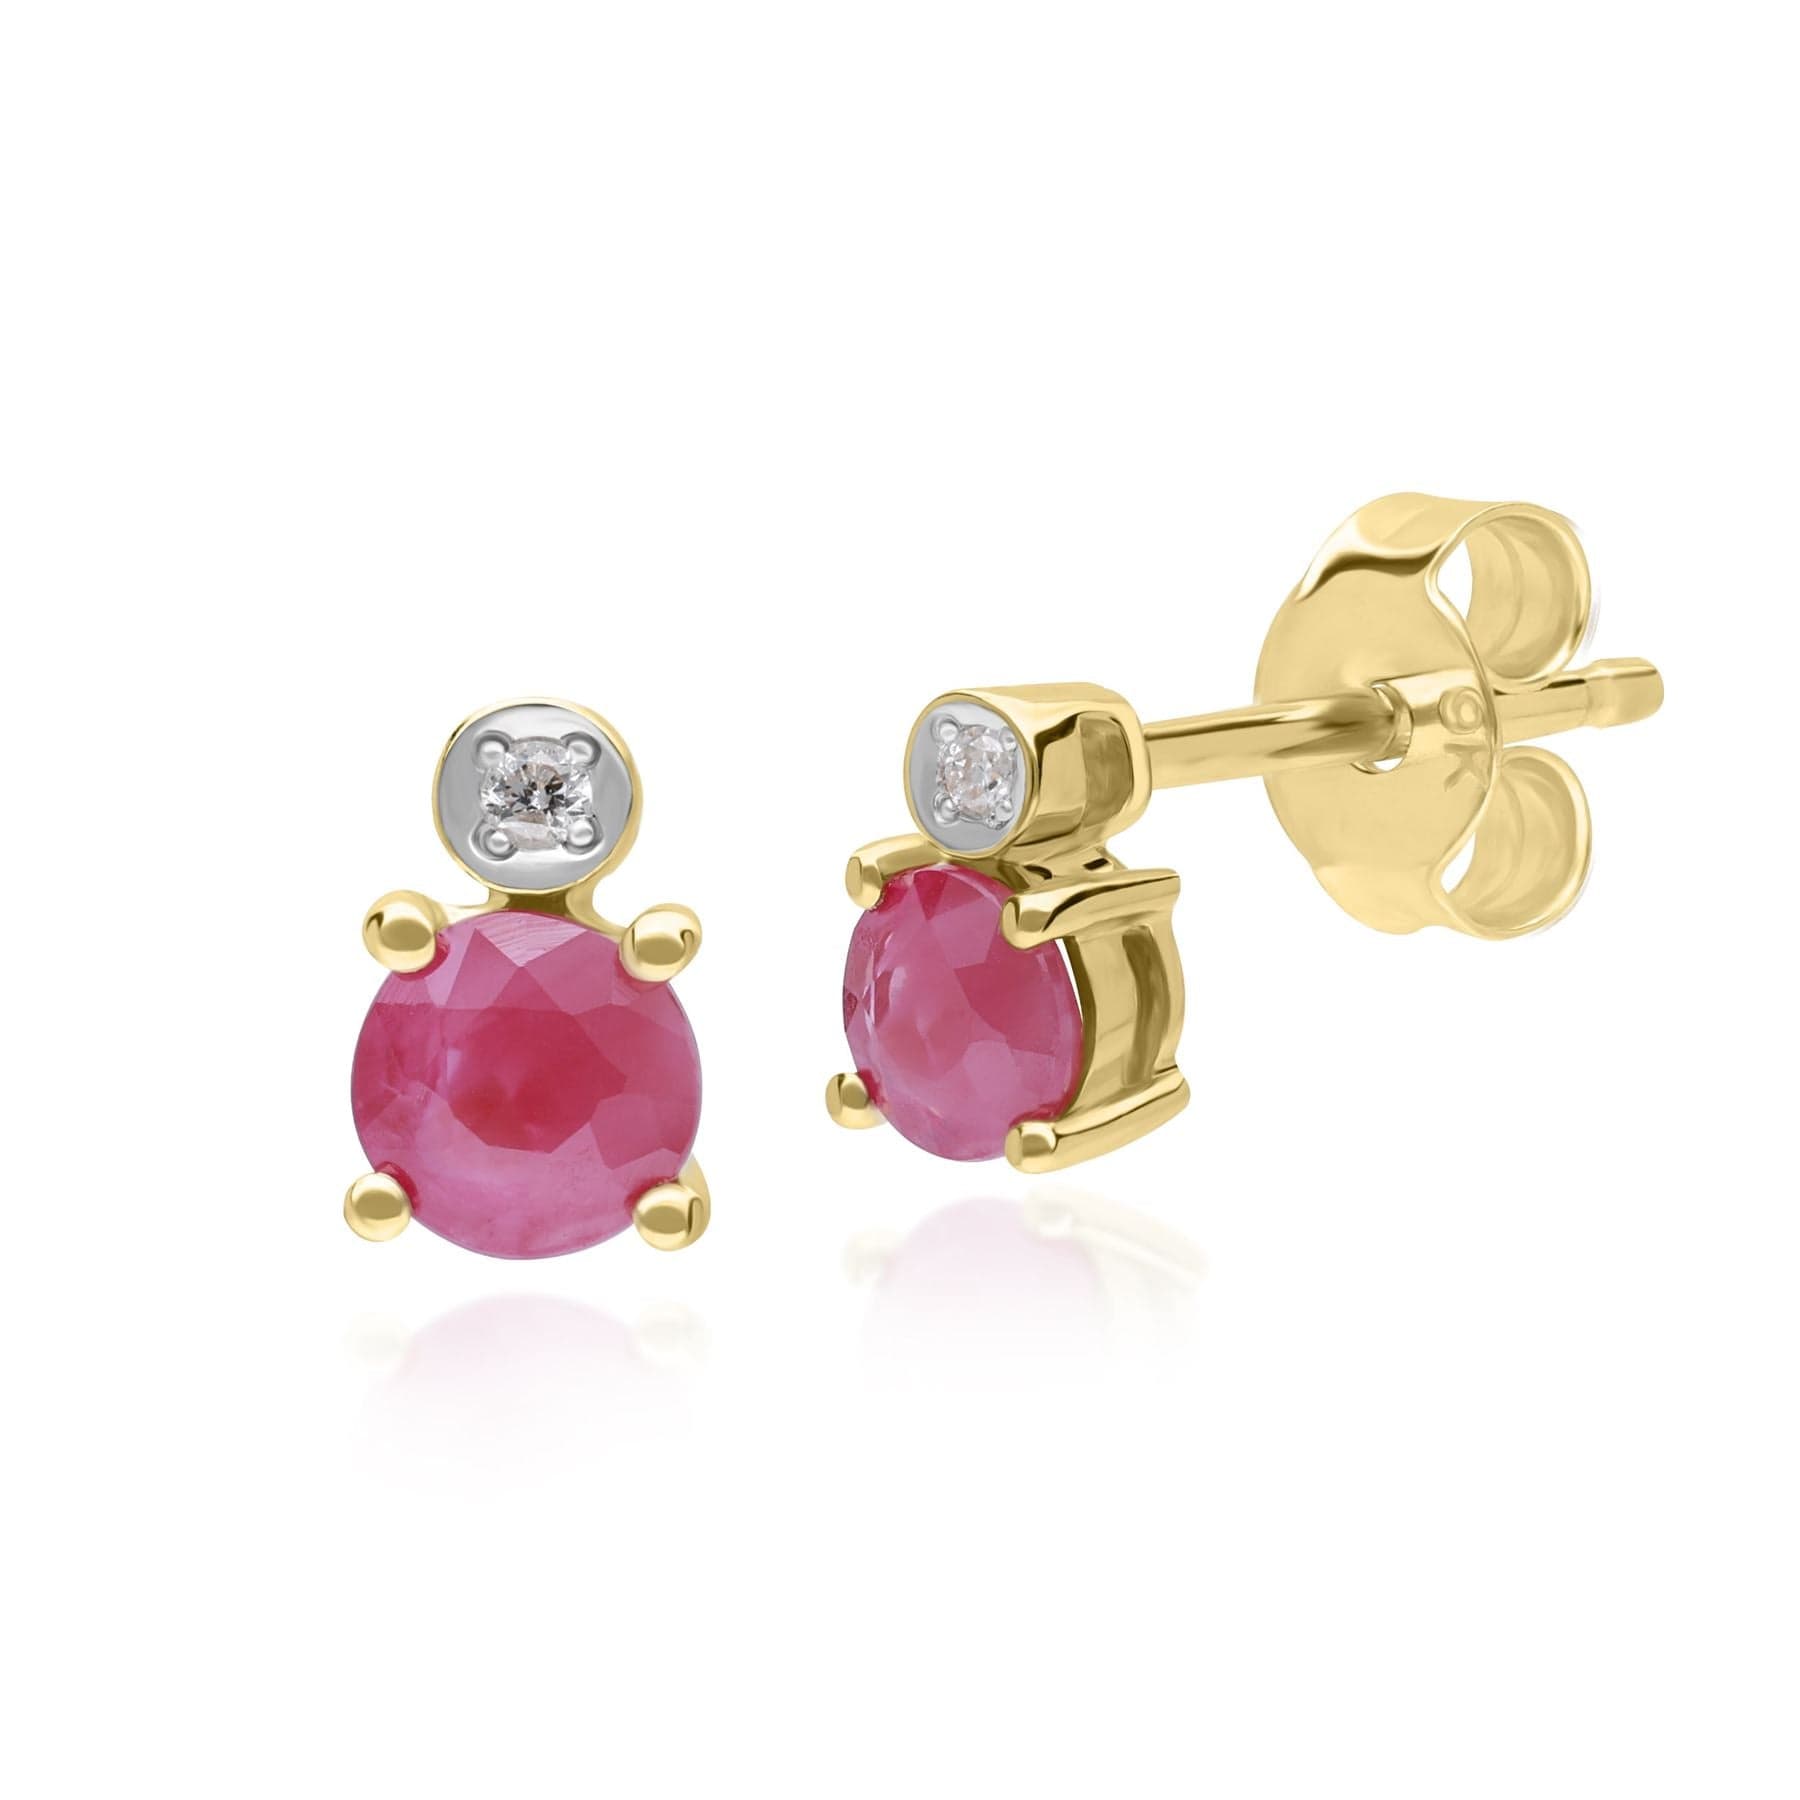 135E1816019 Micro Statement Round Ruby & Diamond Stud Earrings in 9ct Yellow Gold 1